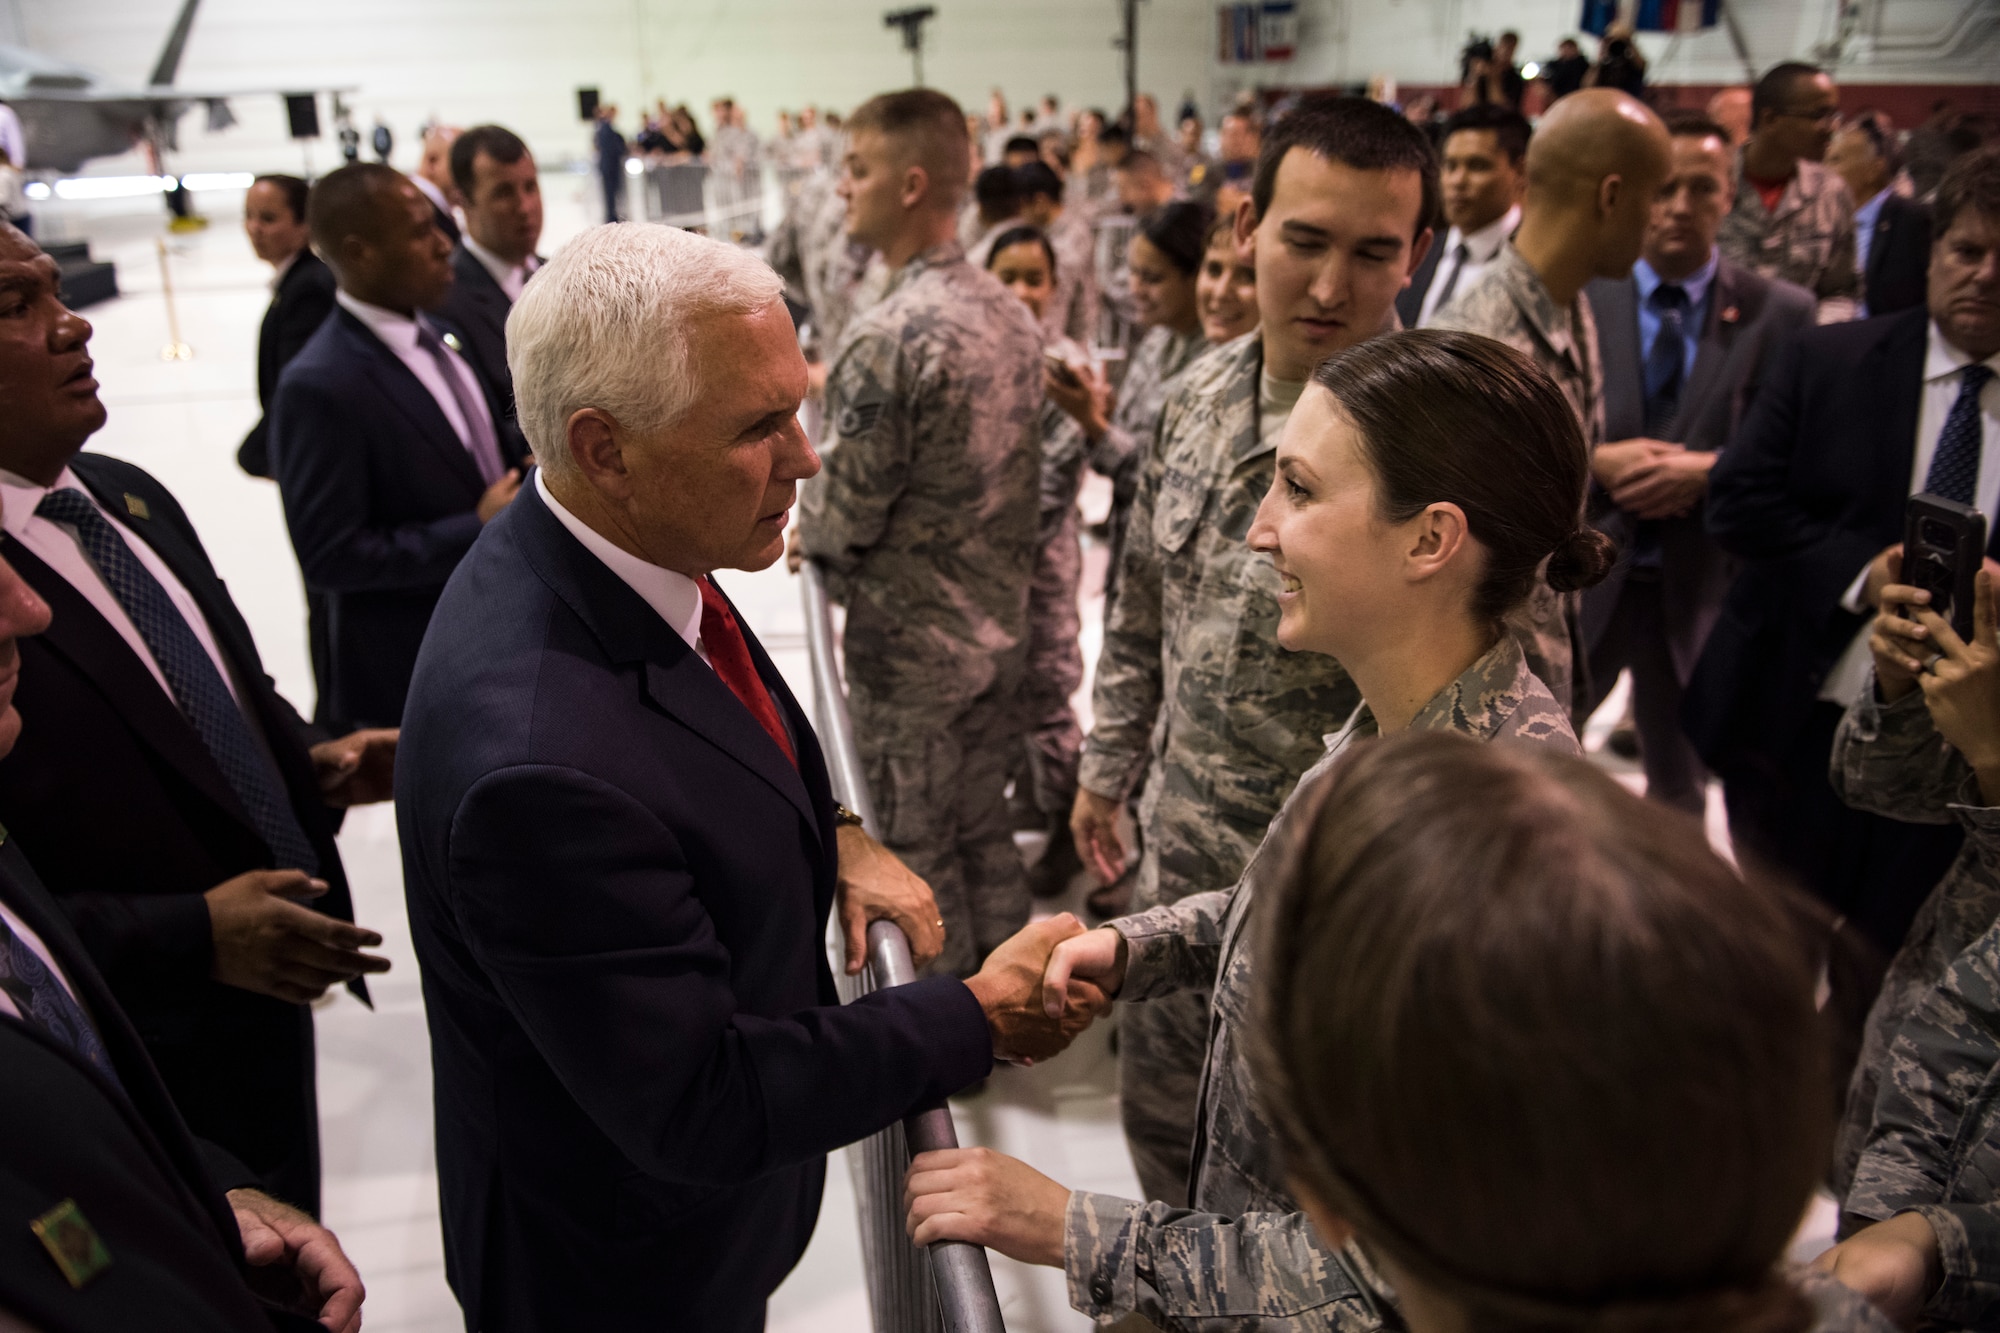 Vice President Mike Pence greets Airmen during a morale visit to Nellis Air Force Base, Nevada, Sept. 7, 2018. Pence took to the stage of the Thunderbirds hangar, home of the U.S. Air Force Aerial Demonstration Squadron, to address Airmen and veterans. (U.S. Air Force photo by Airman 1st Class Andrew D. Sarver)